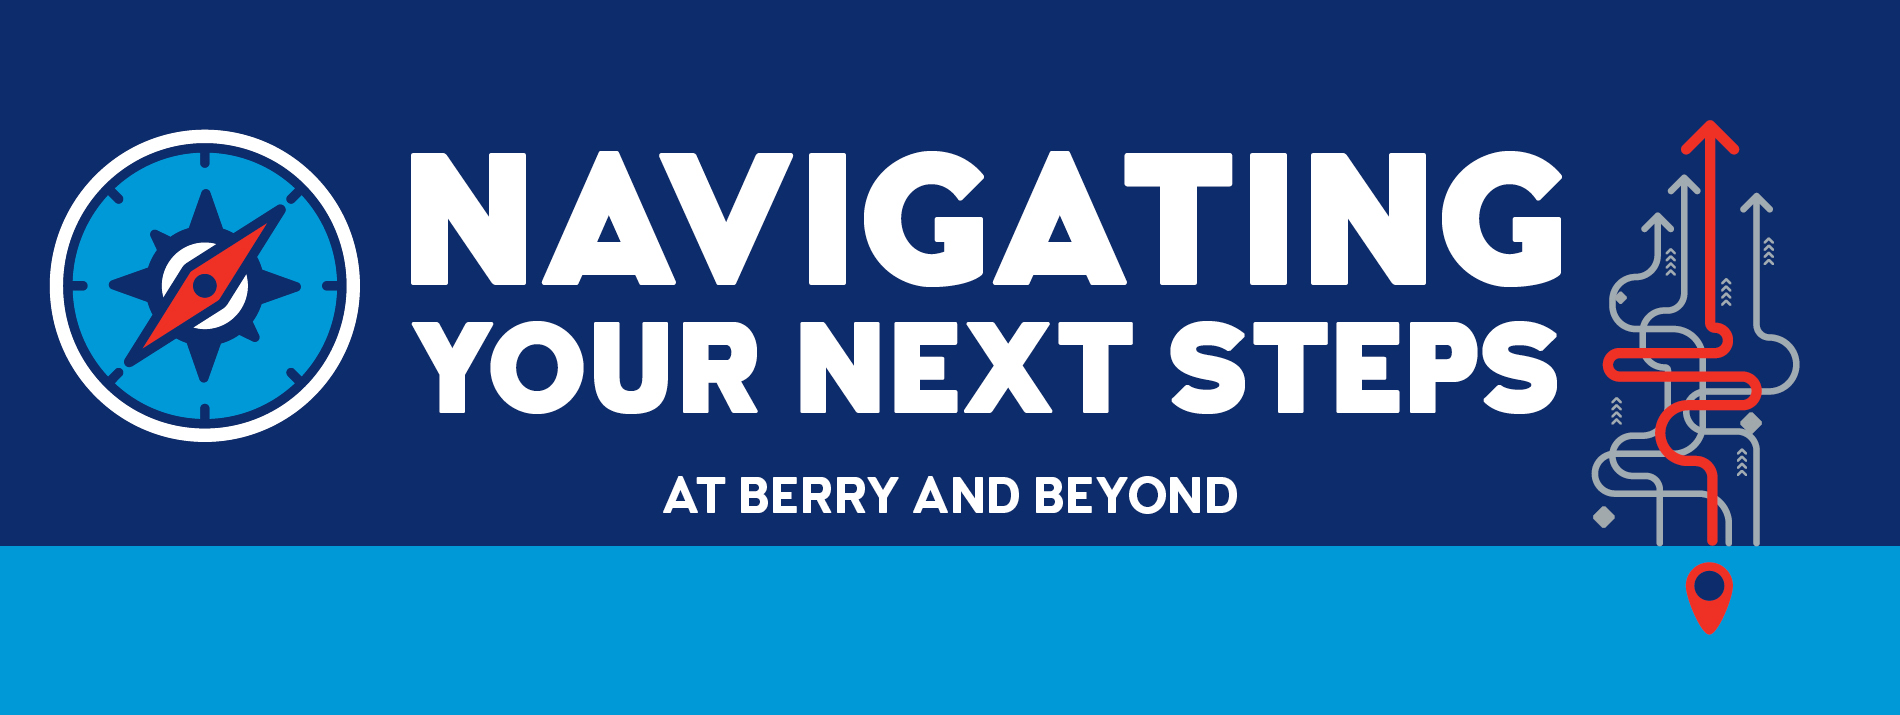 Navigating Your Next Steps at Berry and Beyond